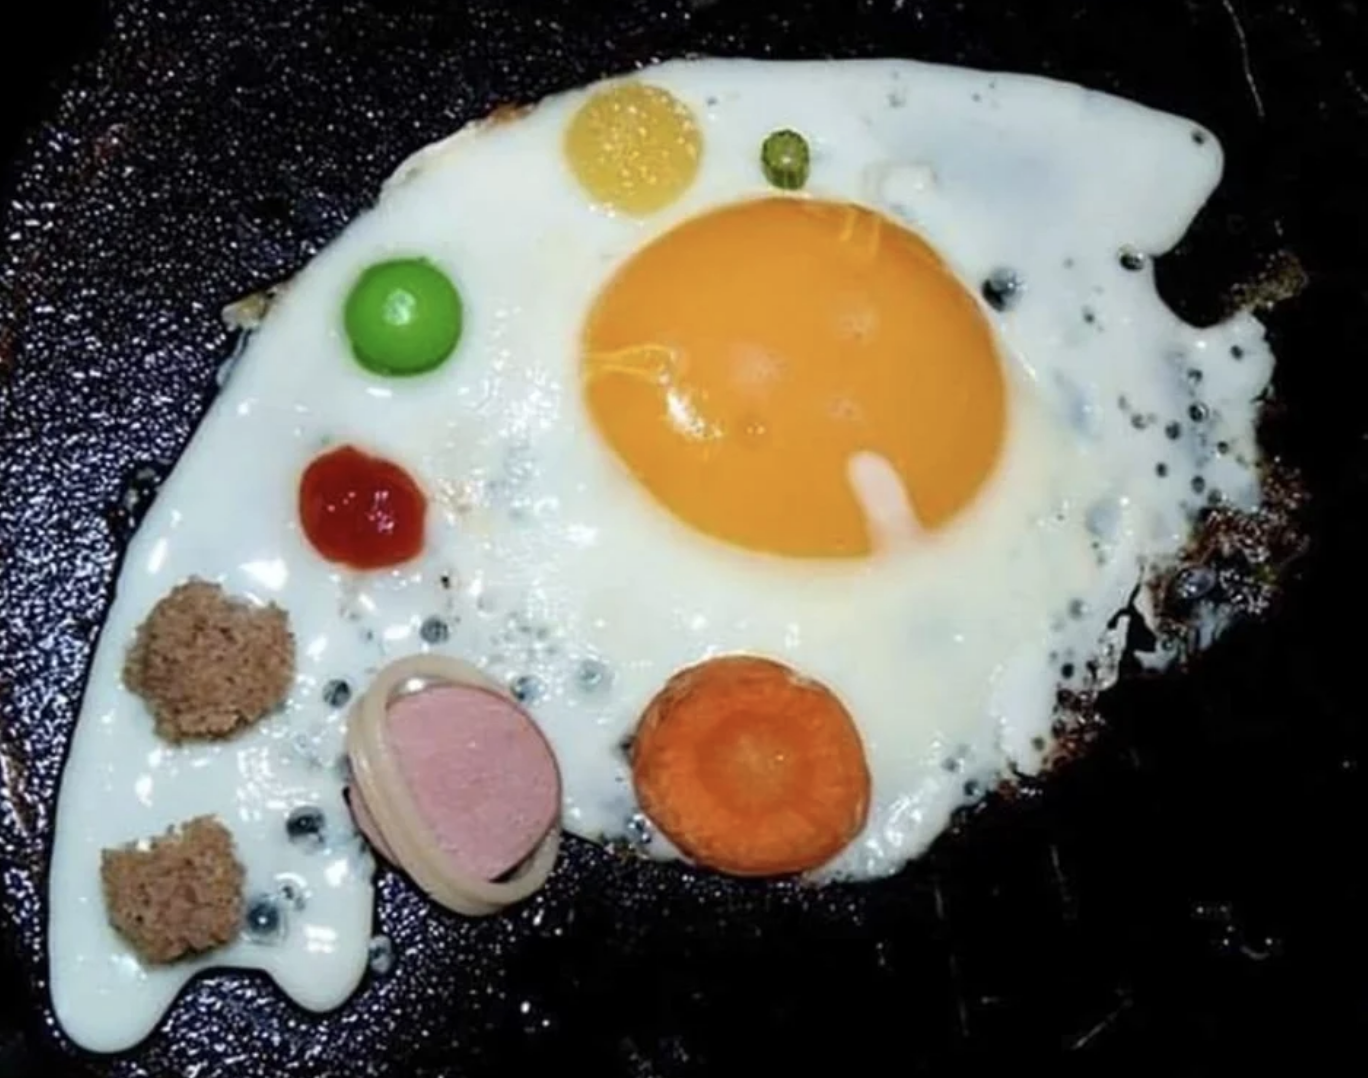 omelet with random pieces of food to make it look like the solar system